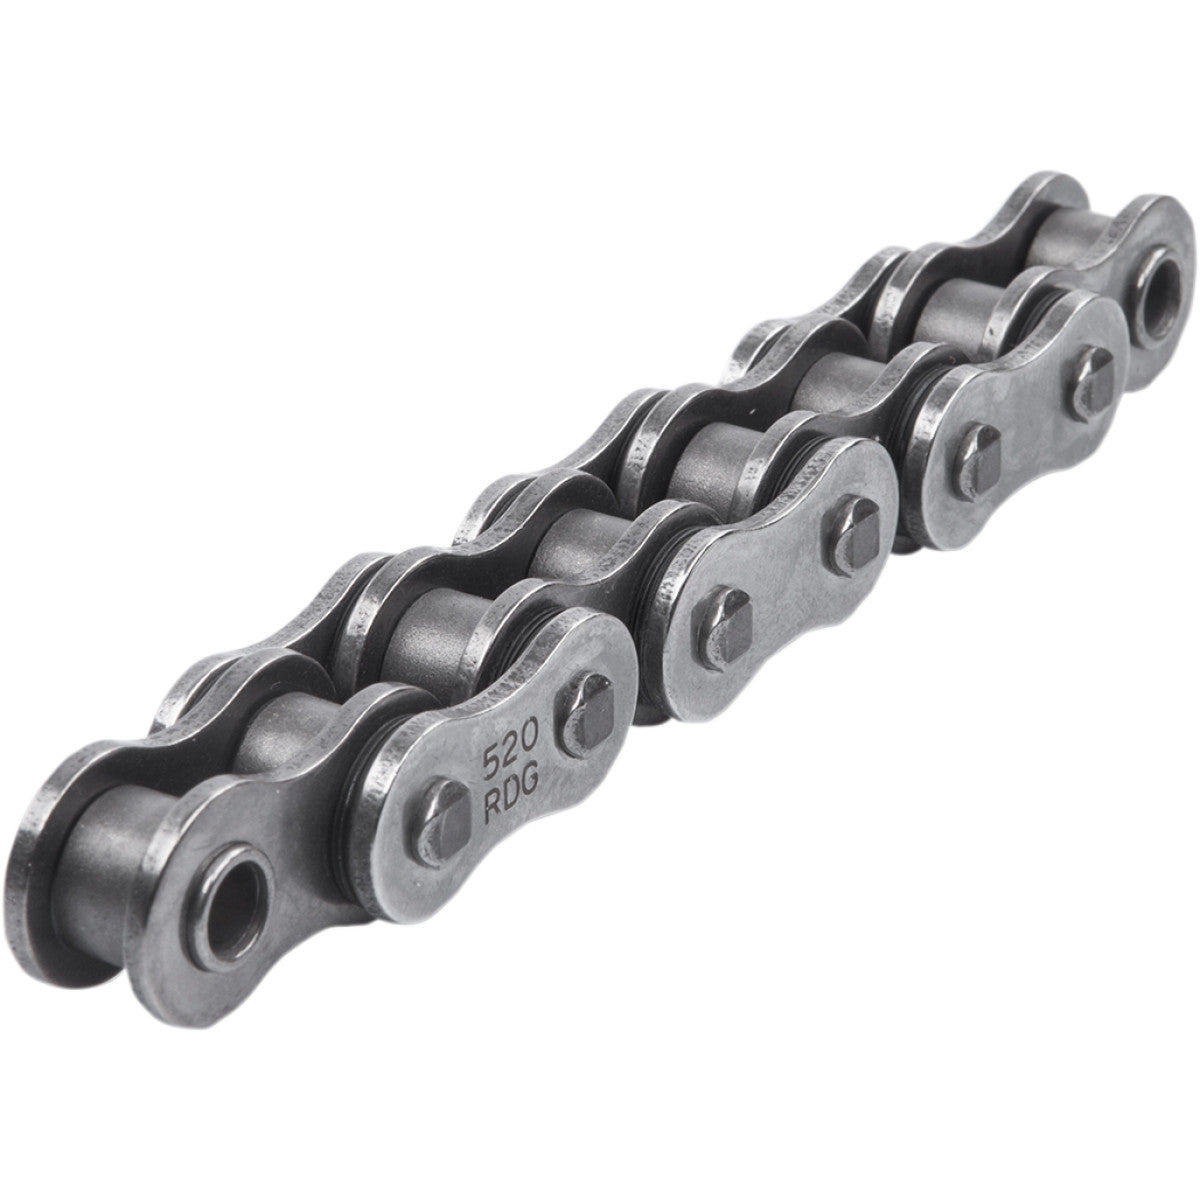 Sunstar 520 RDG Replacement Connecting Link For 520 X-Ring Chain